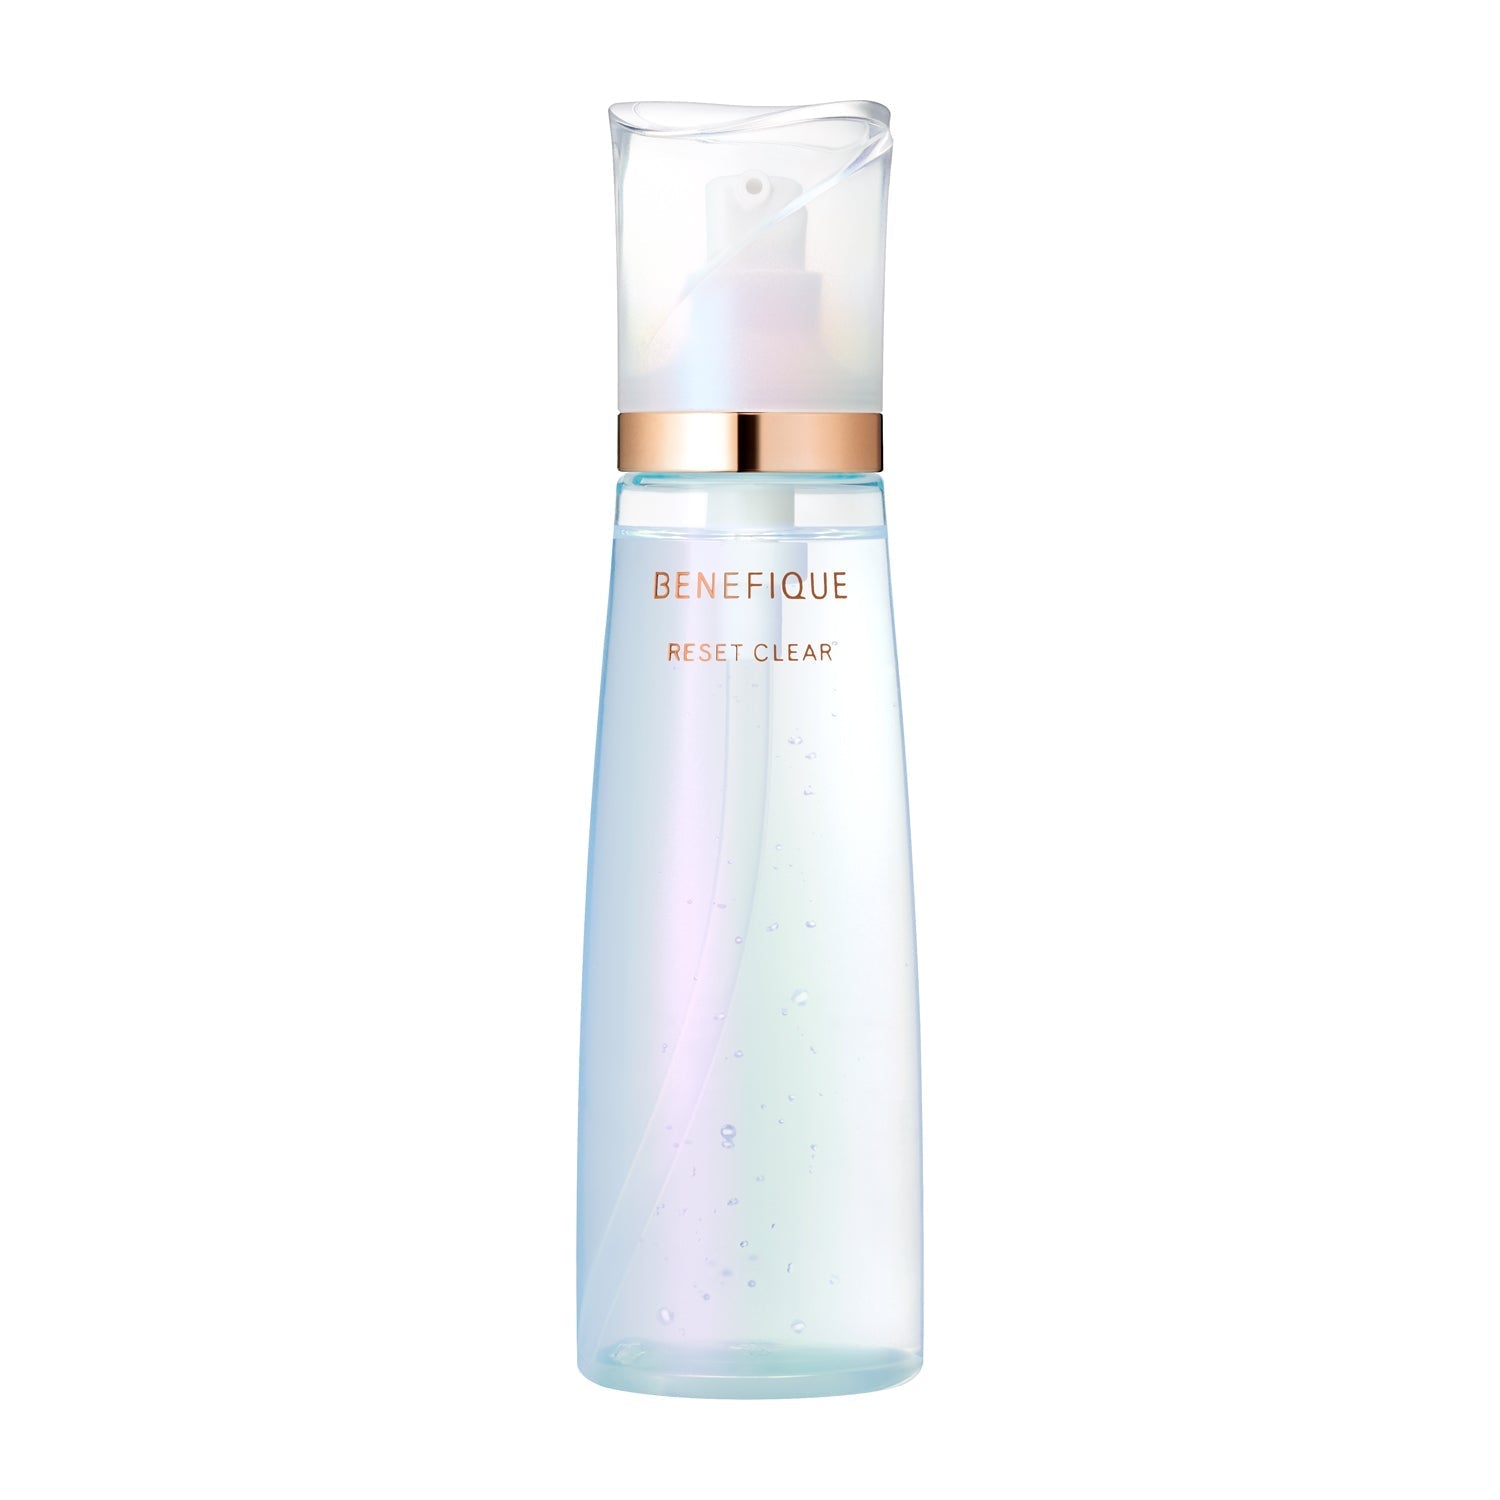 Shiseido Benefique Reset Clear N Exfoliating Lotion 200ml